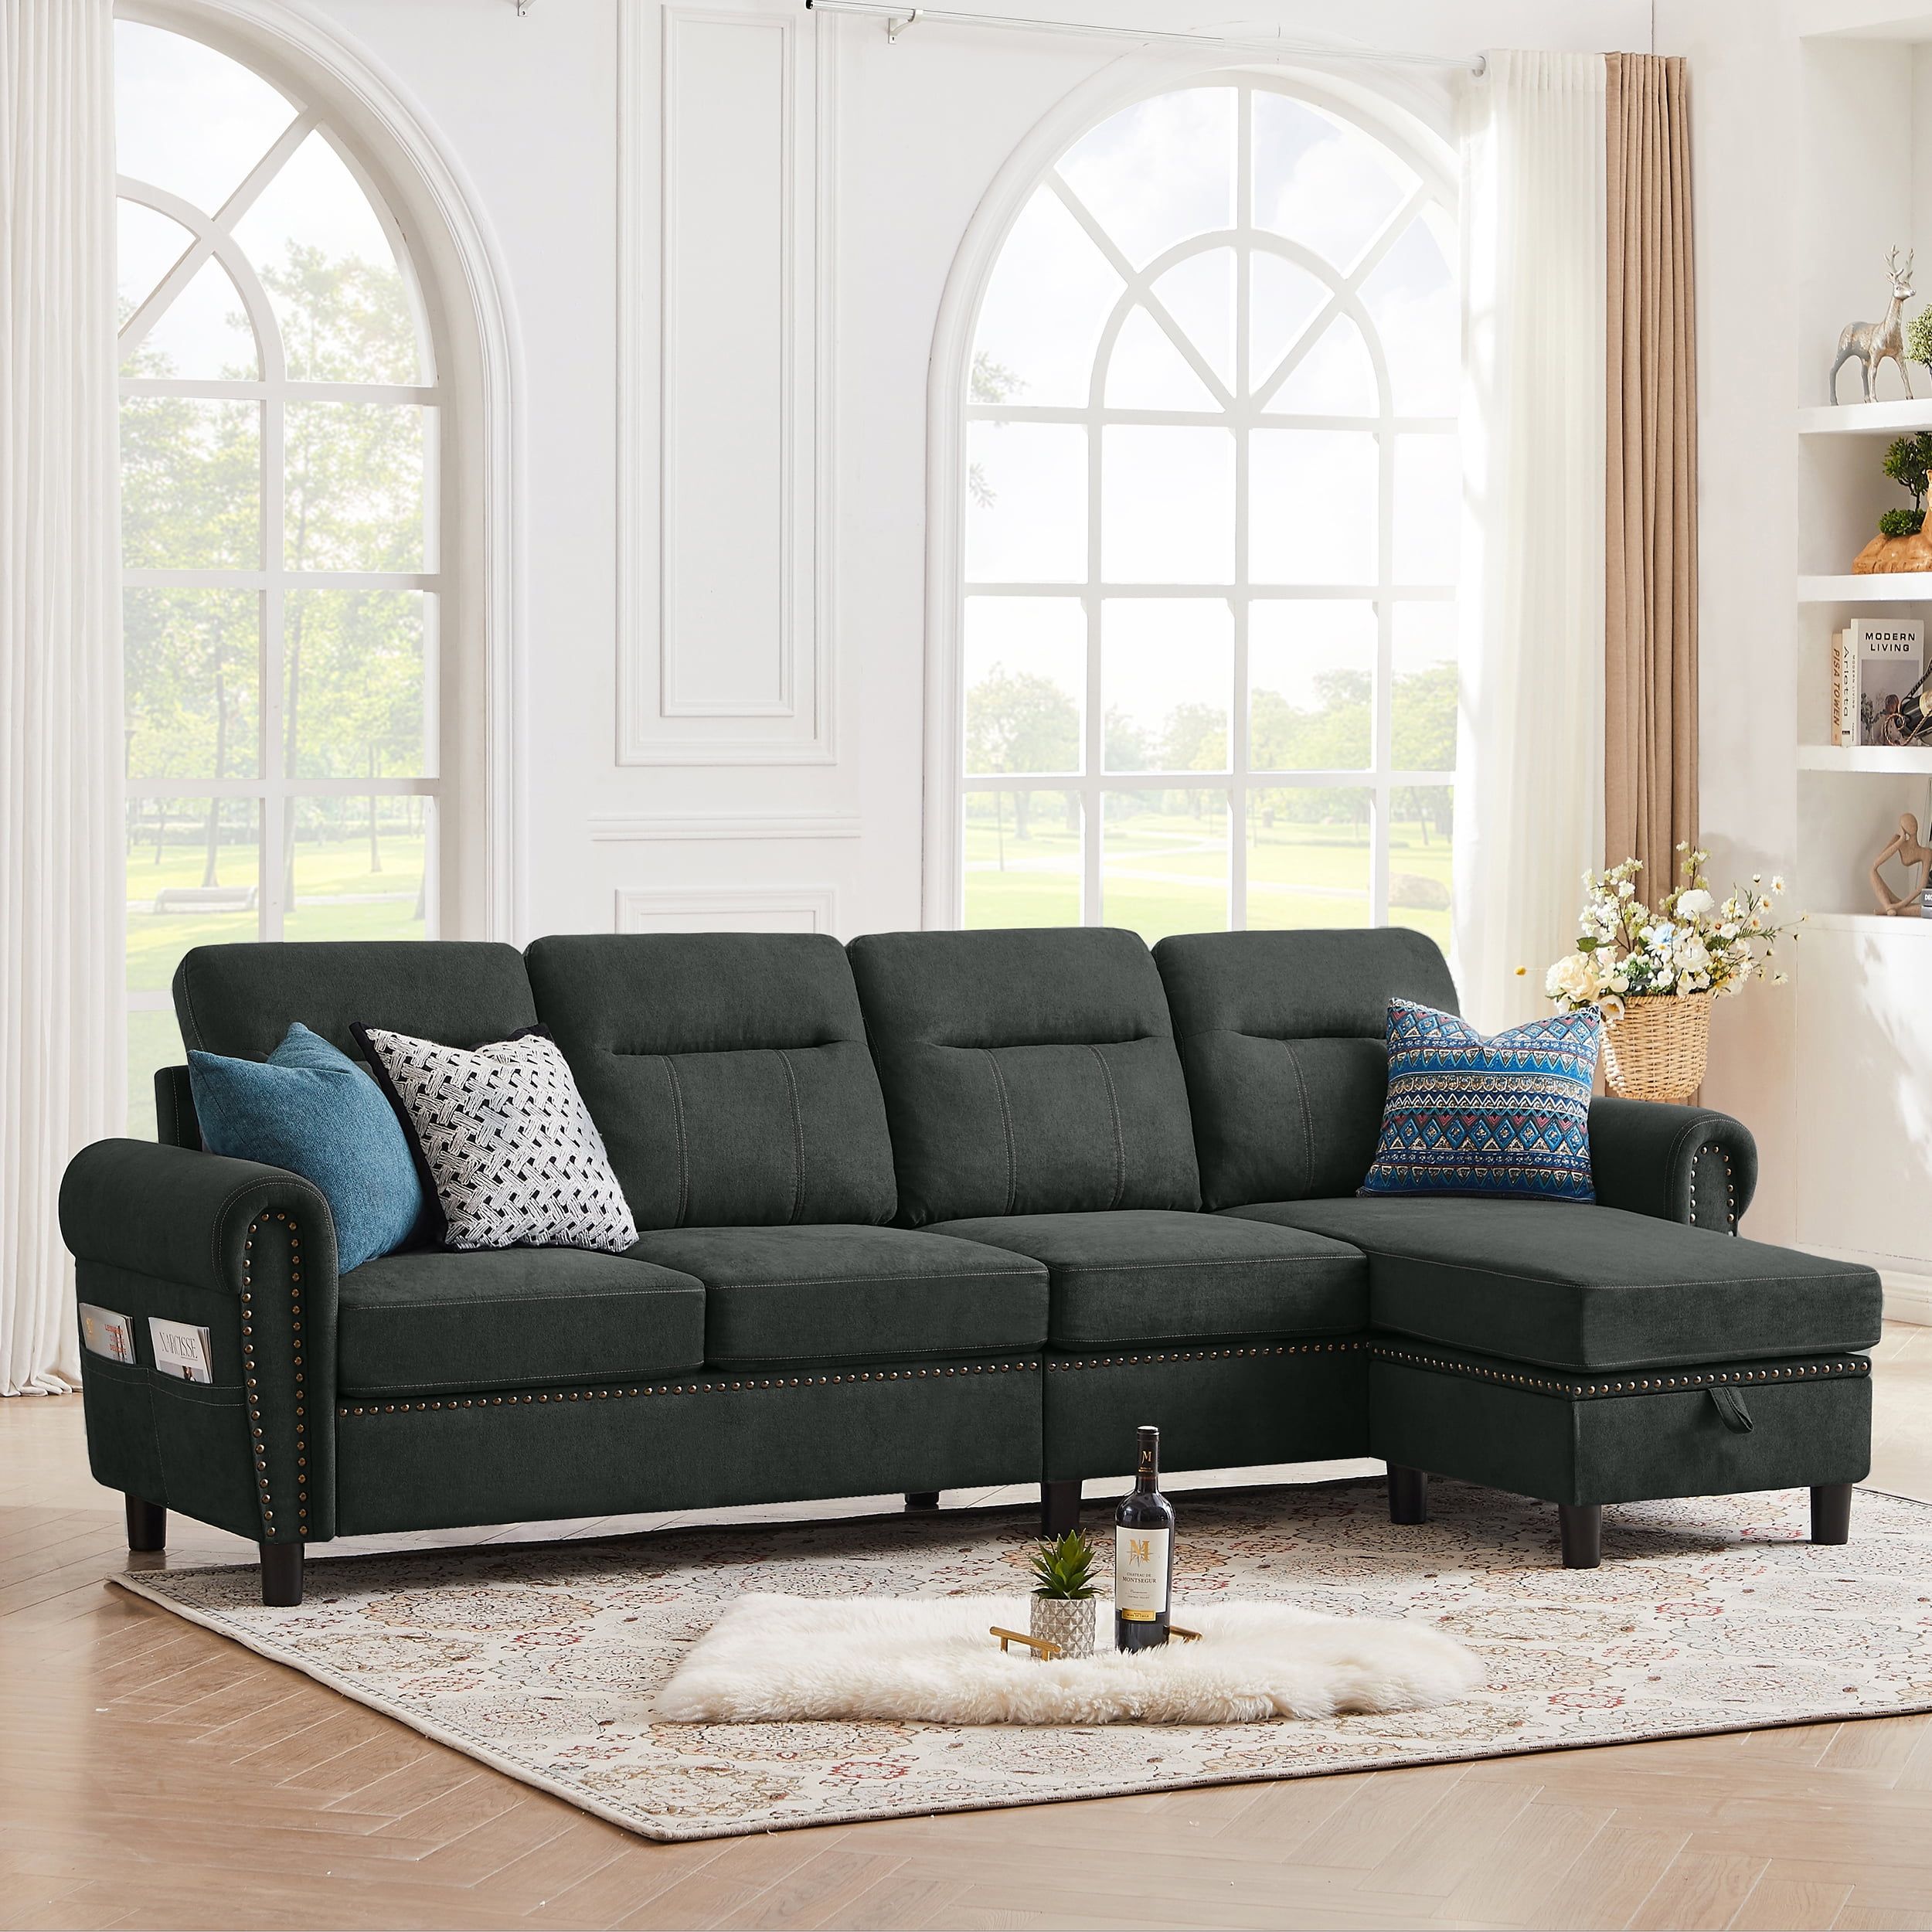 Jarenie Modern Sectional Sofa Couch With Reversible Chaise L Shaped Couch  4 Seat Convertible Sofa For Living Room ,Sectional Couch ,Living Room  ,Darkgrey – Walmart With L Shape Couches With Reversible Chaises (View 7 of 15)